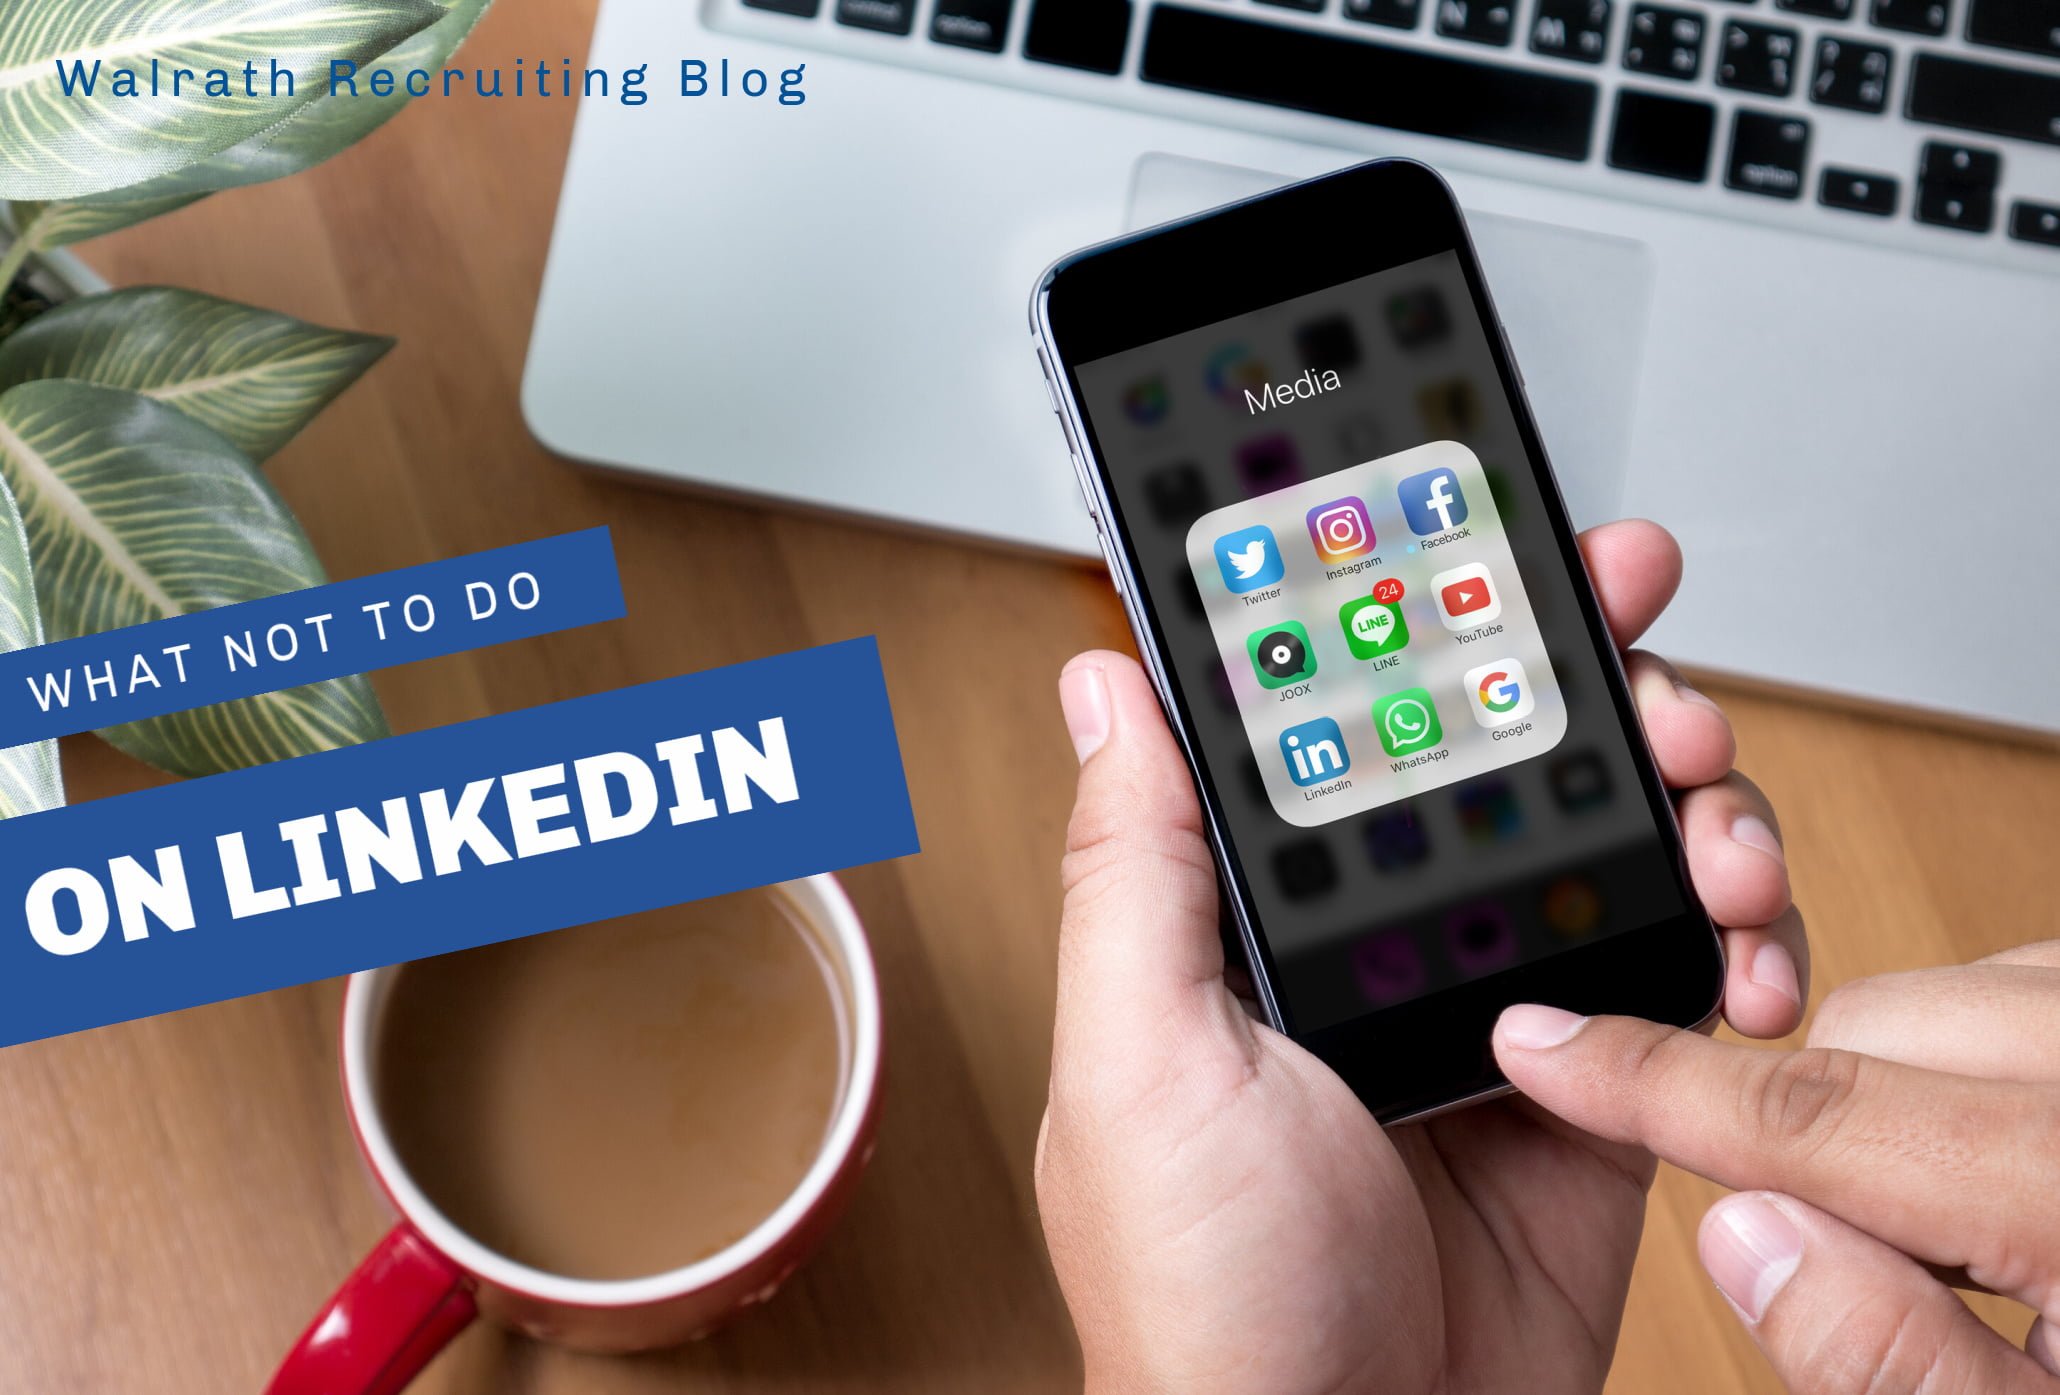 LinkedIn is a great resource, however there are some things you should steer clear of when using the site